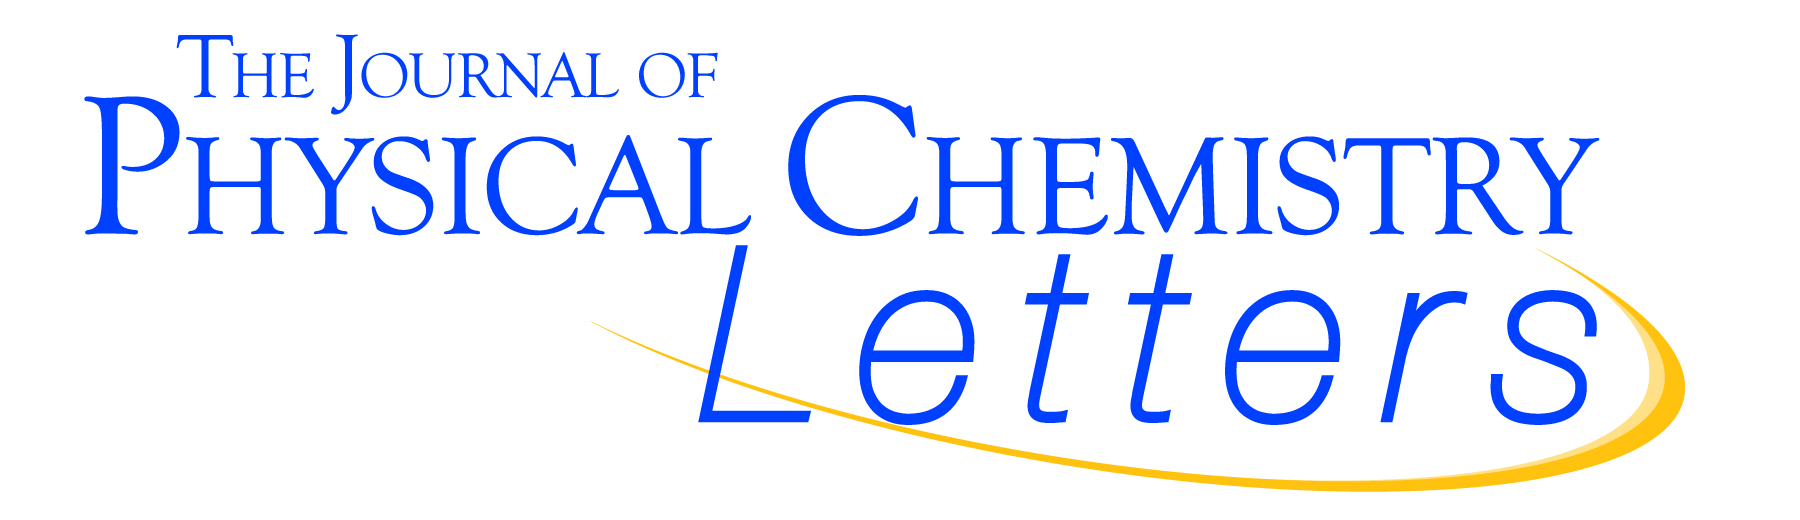 Chemical society. The Journal of physical Chemistry c. American Chemical Society publications. ACS publications. Journal of the Turkish Chemical Society.